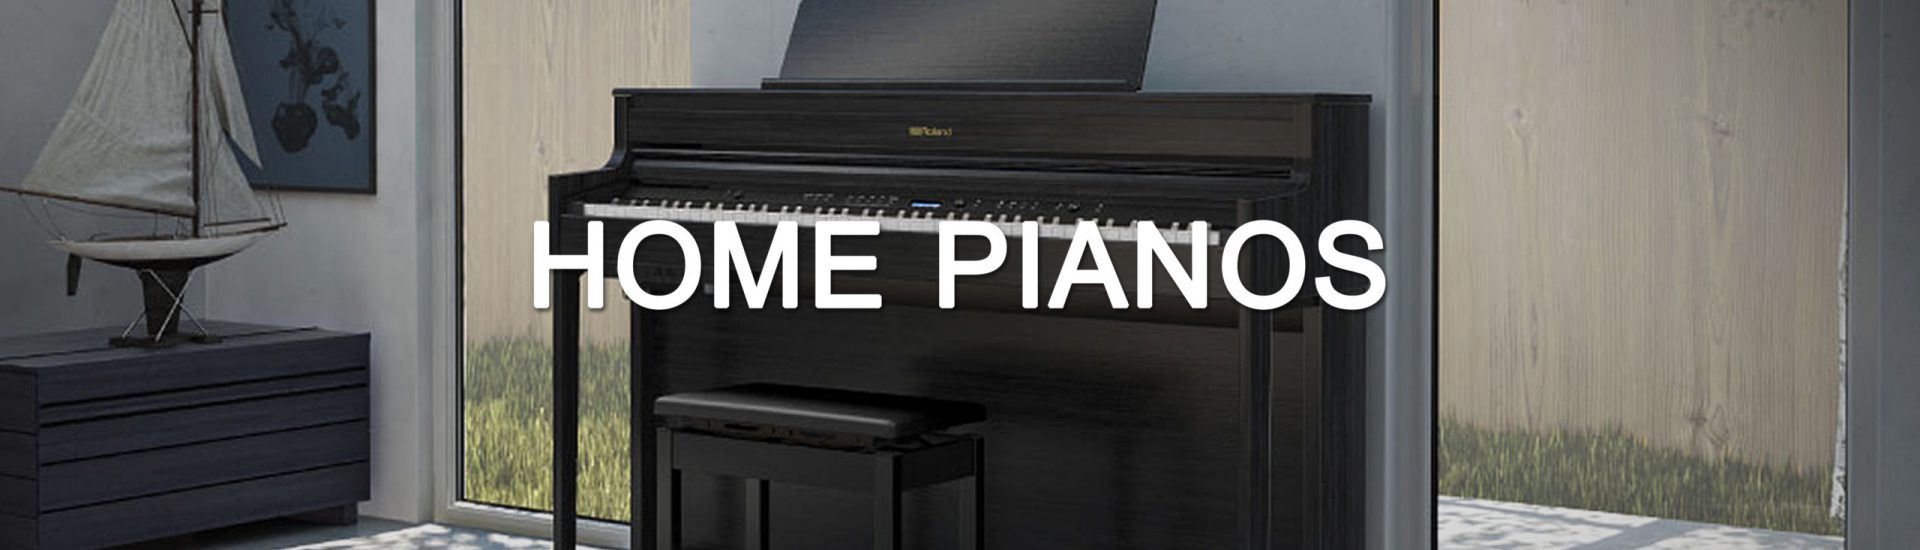 Home Pianos NEW Banner 2